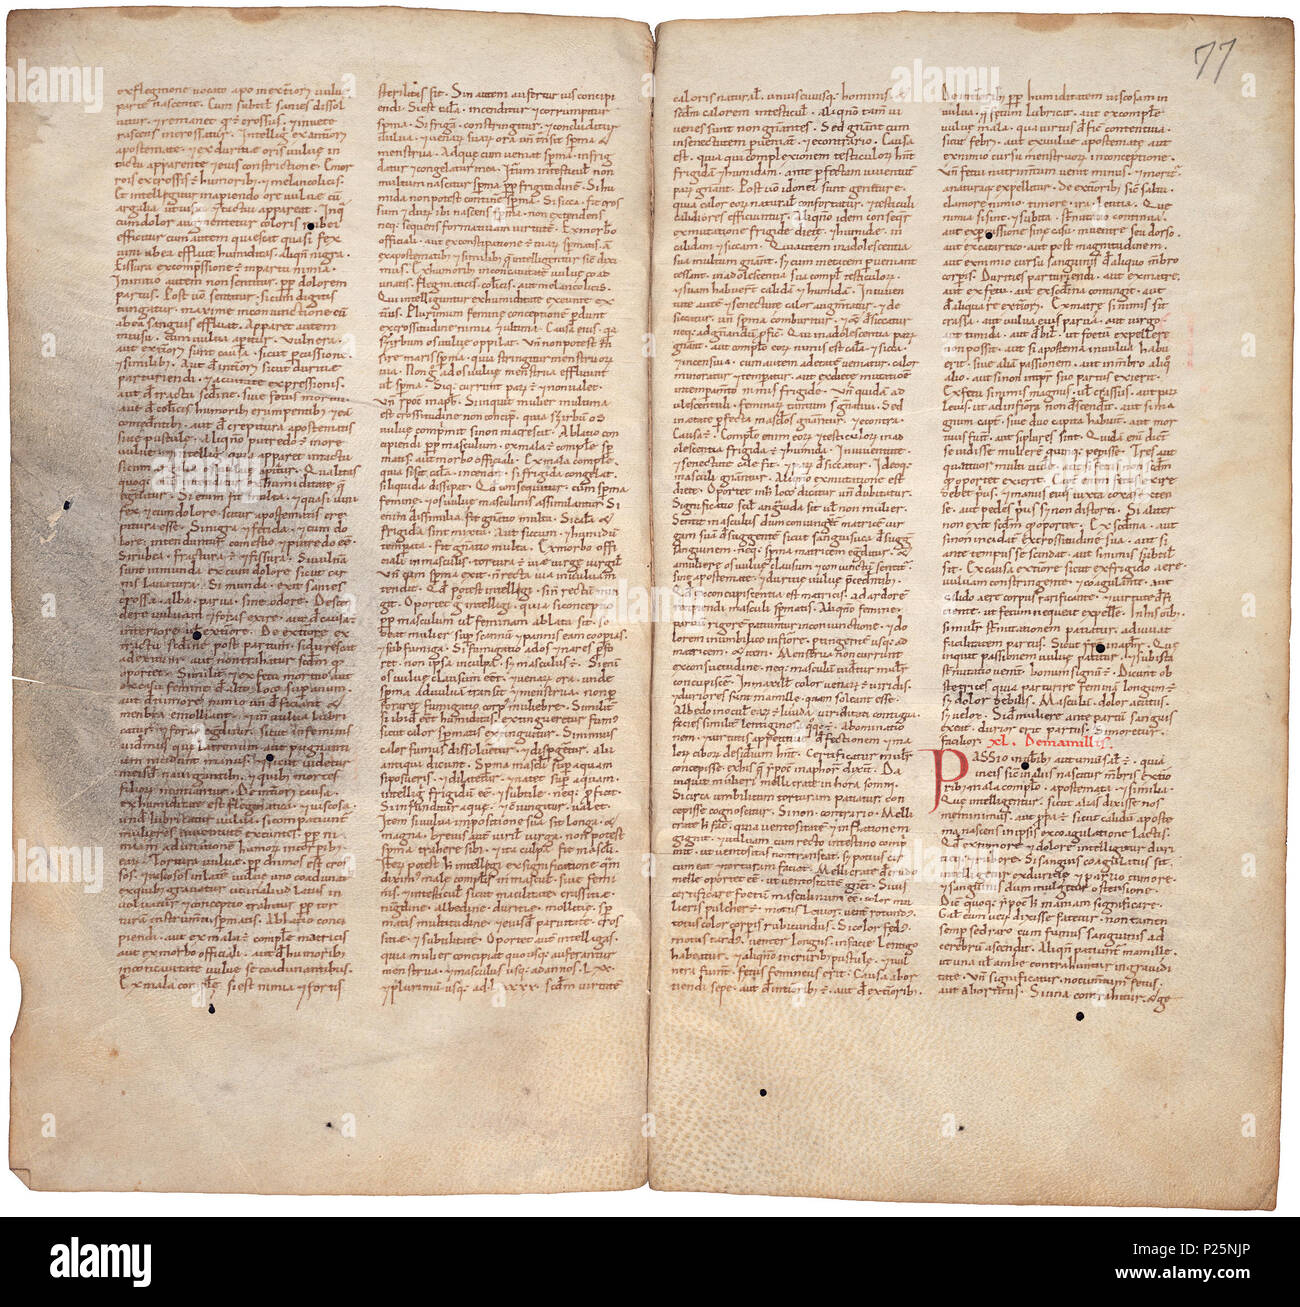 . Pantegni pars prima theorica (lib. I-X) - folios 076v (left) and 077r (right)  .  Lefthand side folio 076v; righthand side folio 077r from an 11th century copy of the Liber pantegni. This is the earliest known copy (prior to 1086) of the Liber pantegni, made at Monte Cassino under the supervision of Constantine the African. It is dedicated to Abbot Desiderius of Monte Cassino (1027-1087), before he became Pope Victor III. Read backgroud information in Dutch and in English. . Constantine the African (ca. 1010-1098/9) 176 Liber pantegni - KB 73 J 6 - folios 076v (left) and 077r (right) Stock Photo